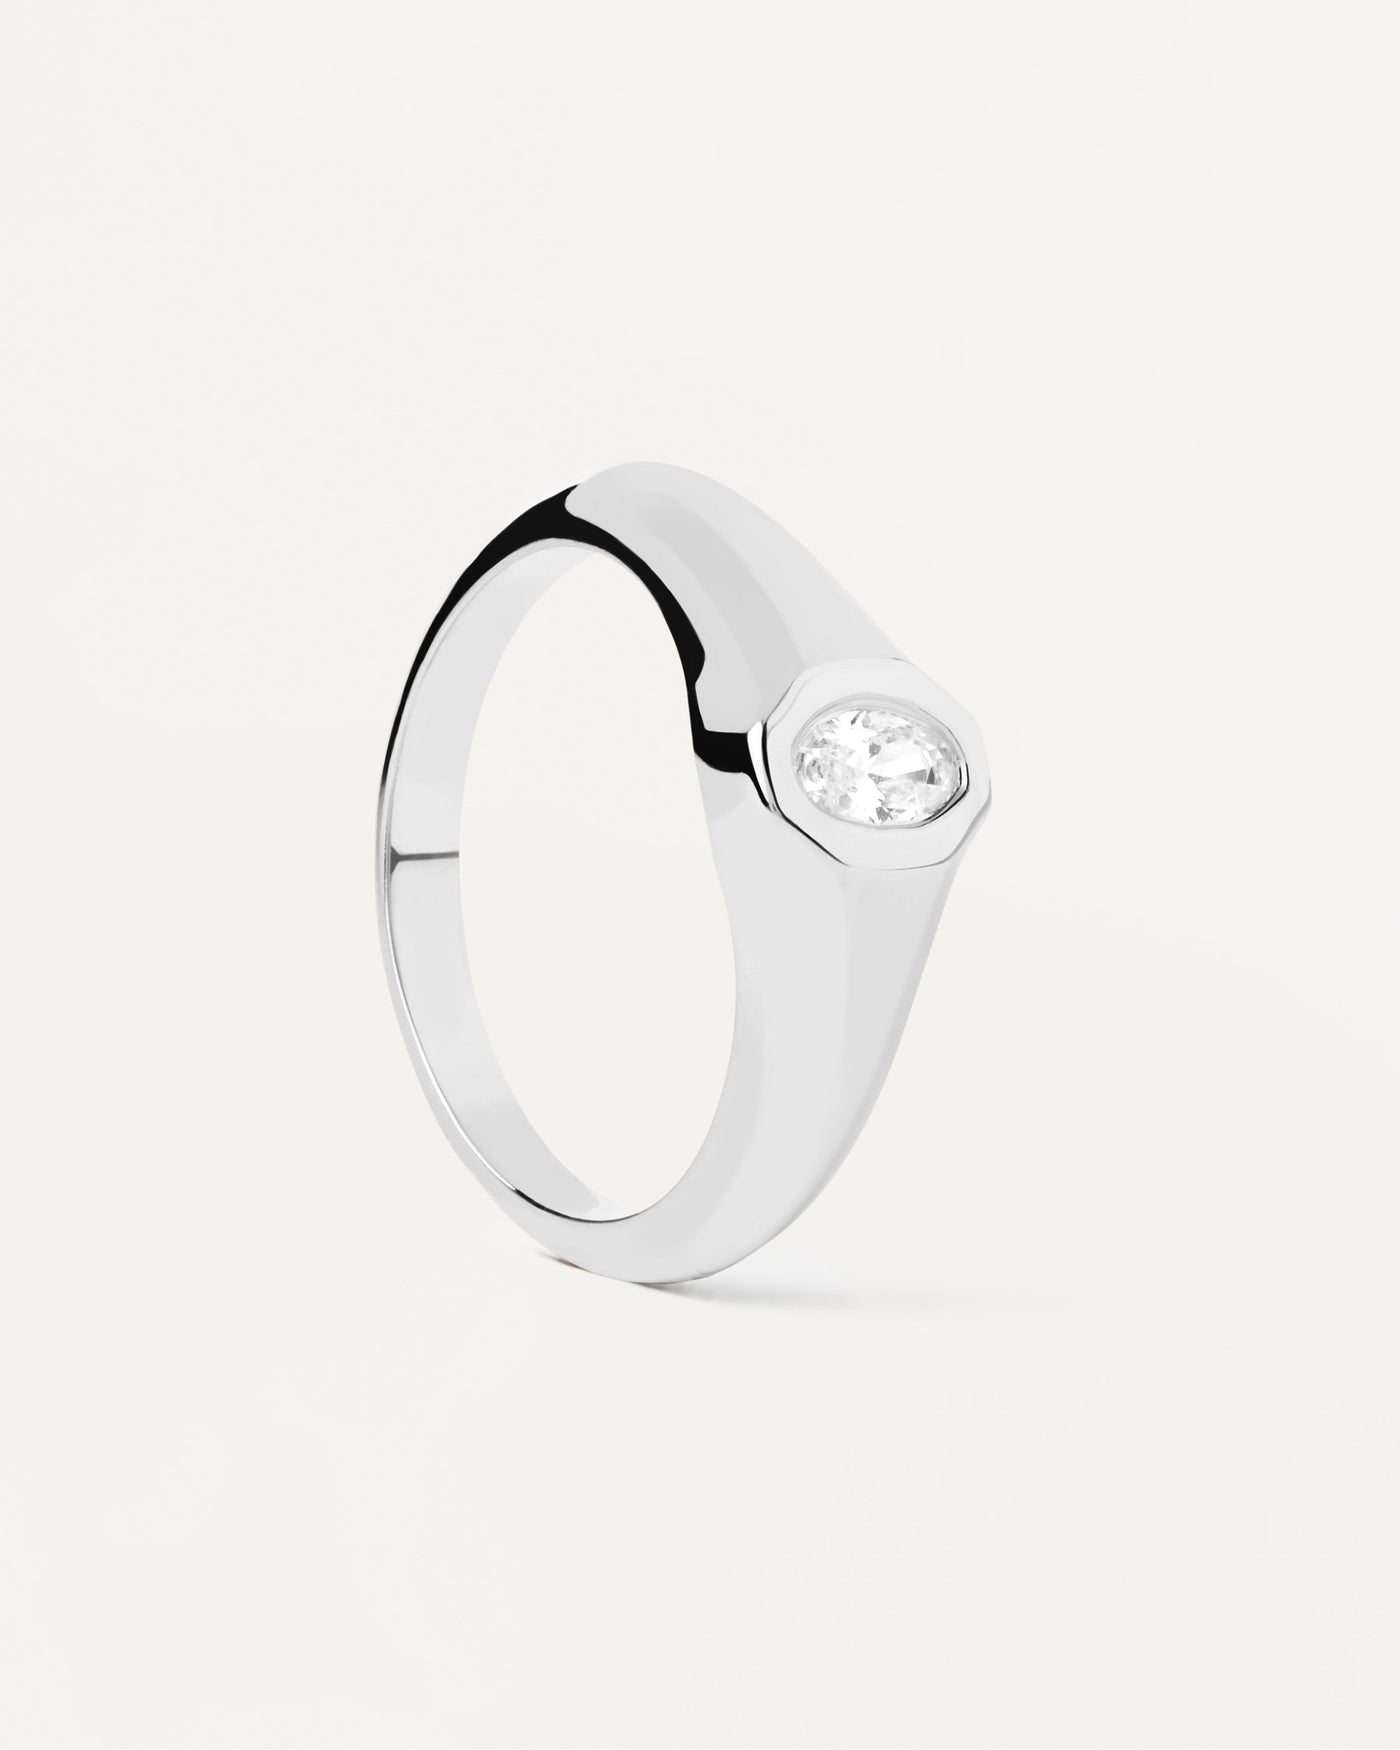 2023 Selection | Karry Stamp Silver Ring. Sterling silver signet ring with oval white zirconia. Get the latest arrival from PDPAOLA. Place your order safely and get this Best Seller. Free Shipping.